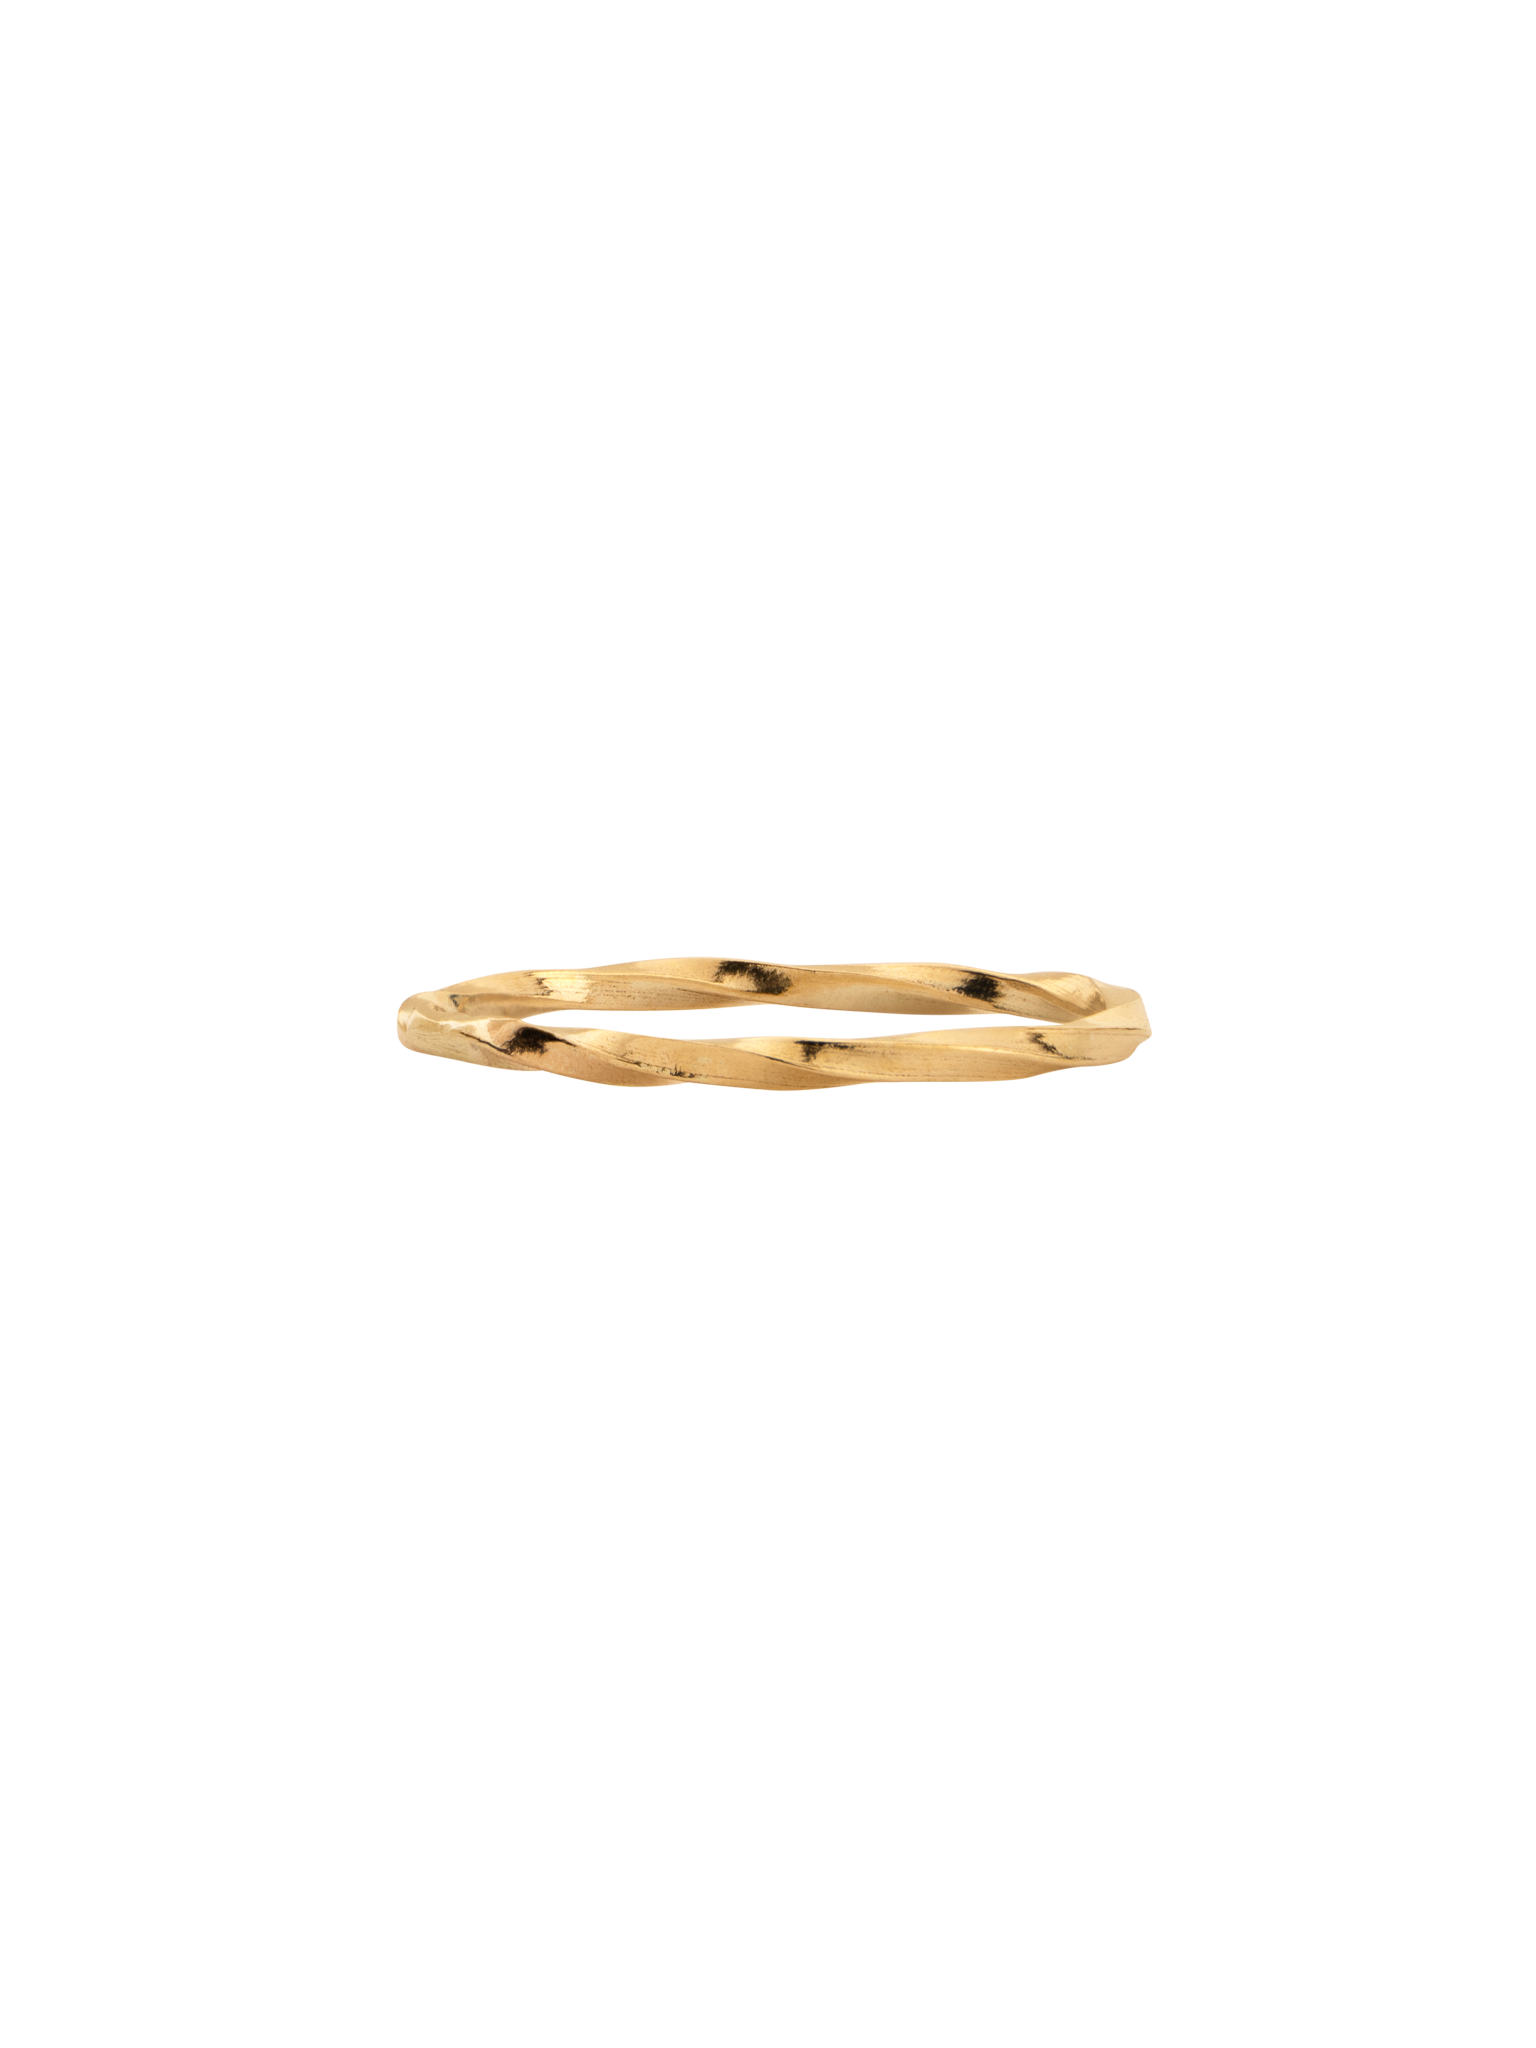 Twisted stacking ring